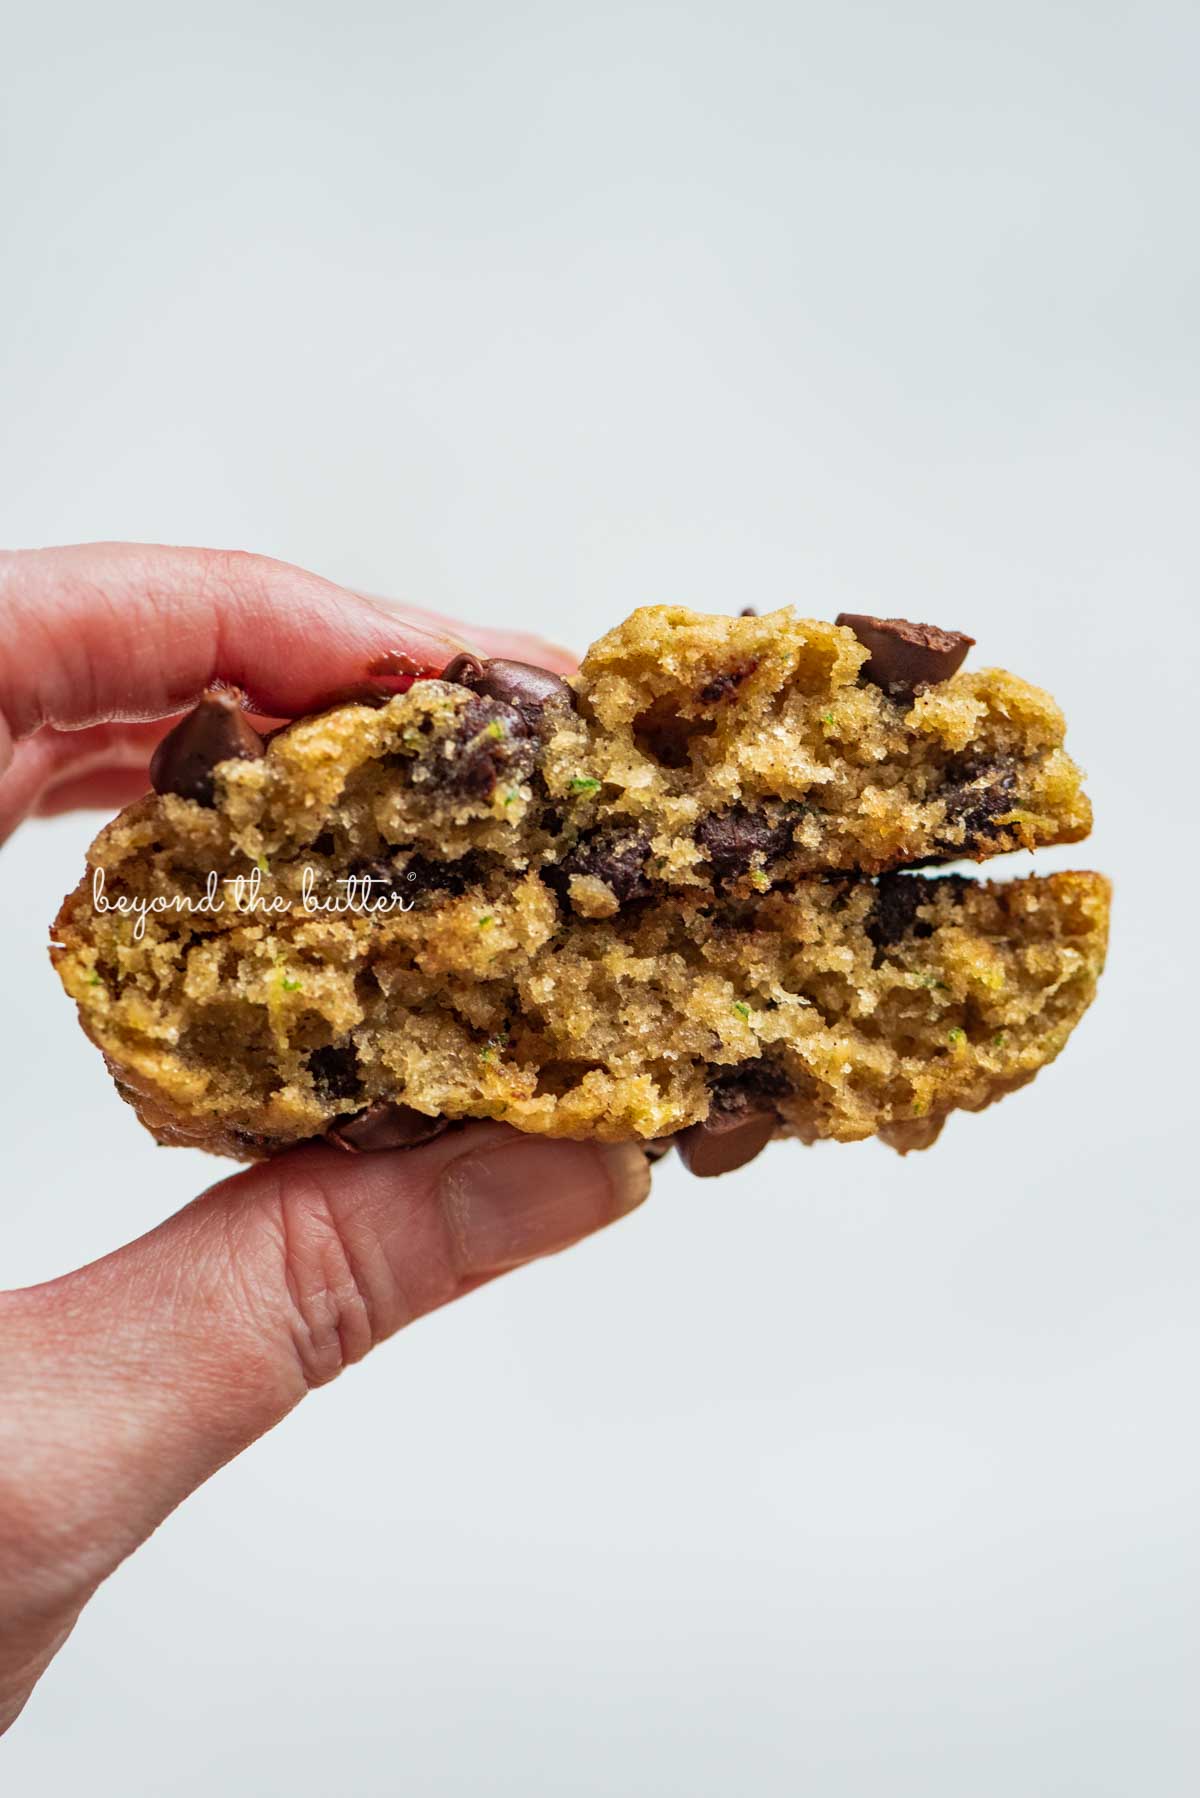 Inside shot of a zucchini chocolate chi oatmeal cookie from BeyondtheButter.com | © Beyond the Butter®